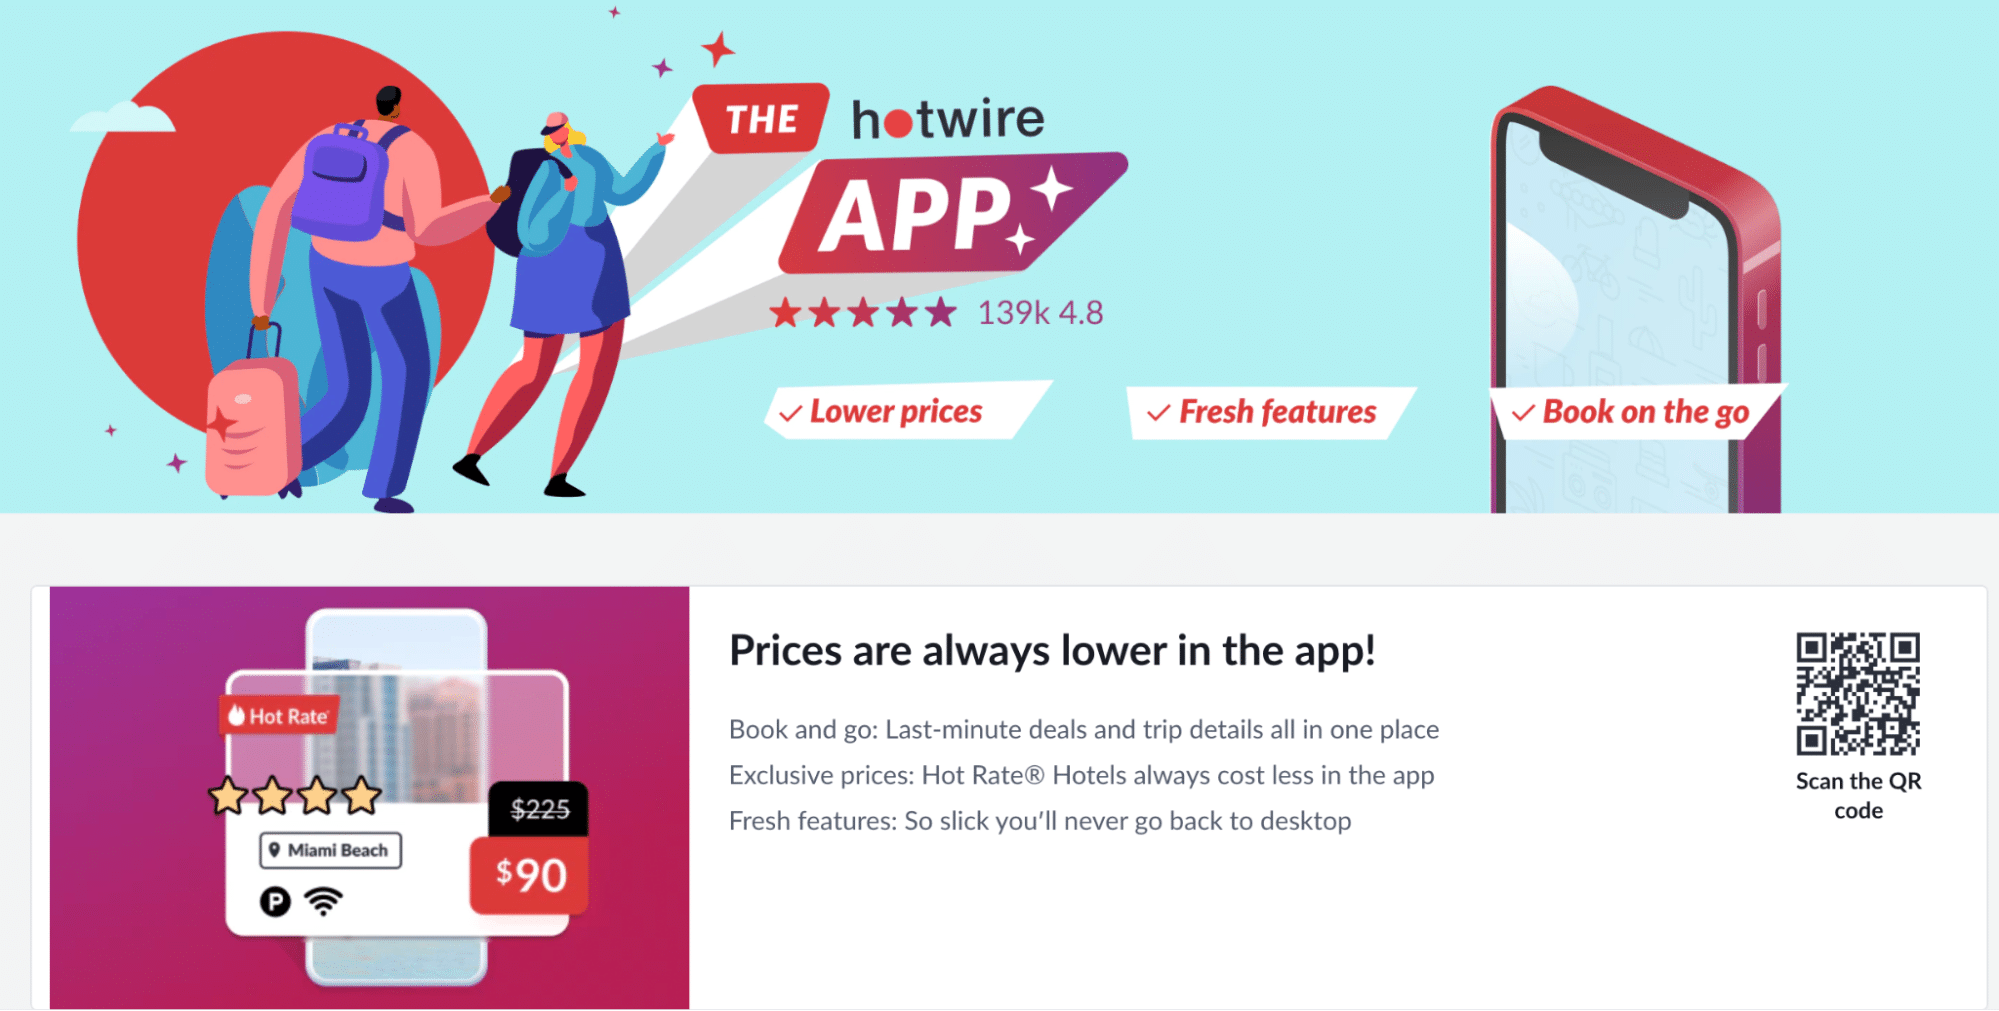 A screenshot from hotwire website of a full-page mobile app advertisement detailing the benefits of the app while also utilizing a QR code for users to scan to download the app.